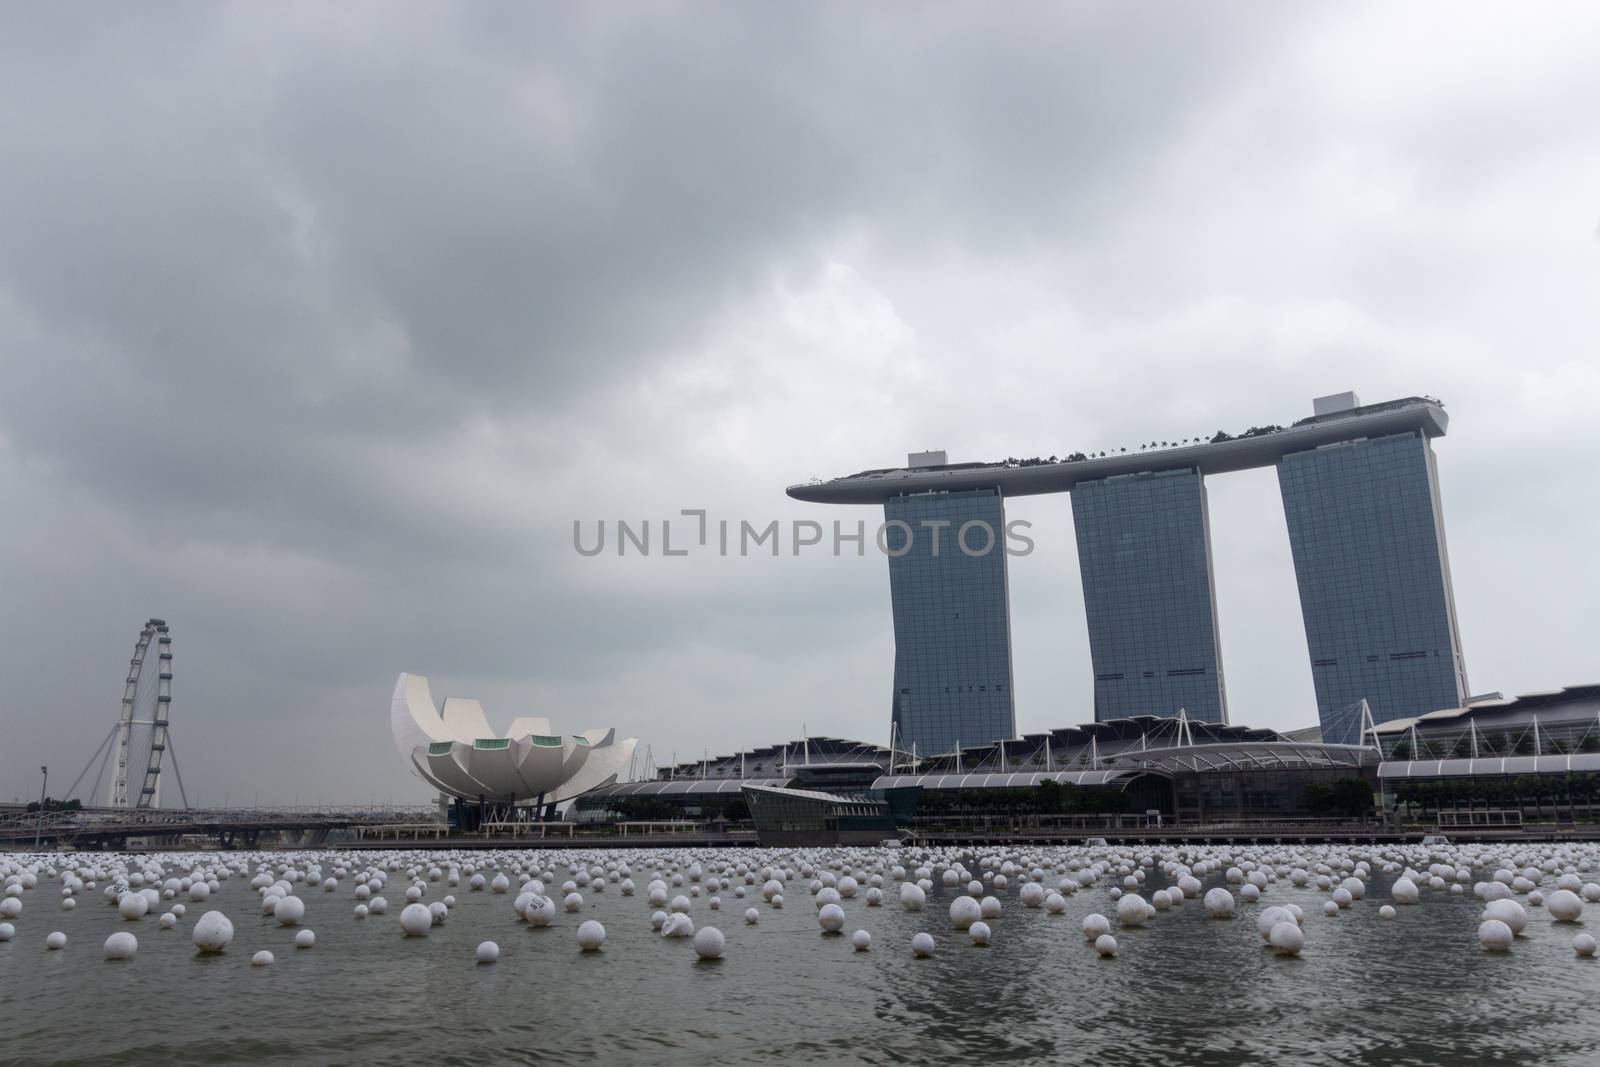 Singapore - CIRCA 2020: Skyline in Marina Bay, view of Art Museum, famous hotel and Singapore Flyer during the day with a stormy sky on the background.